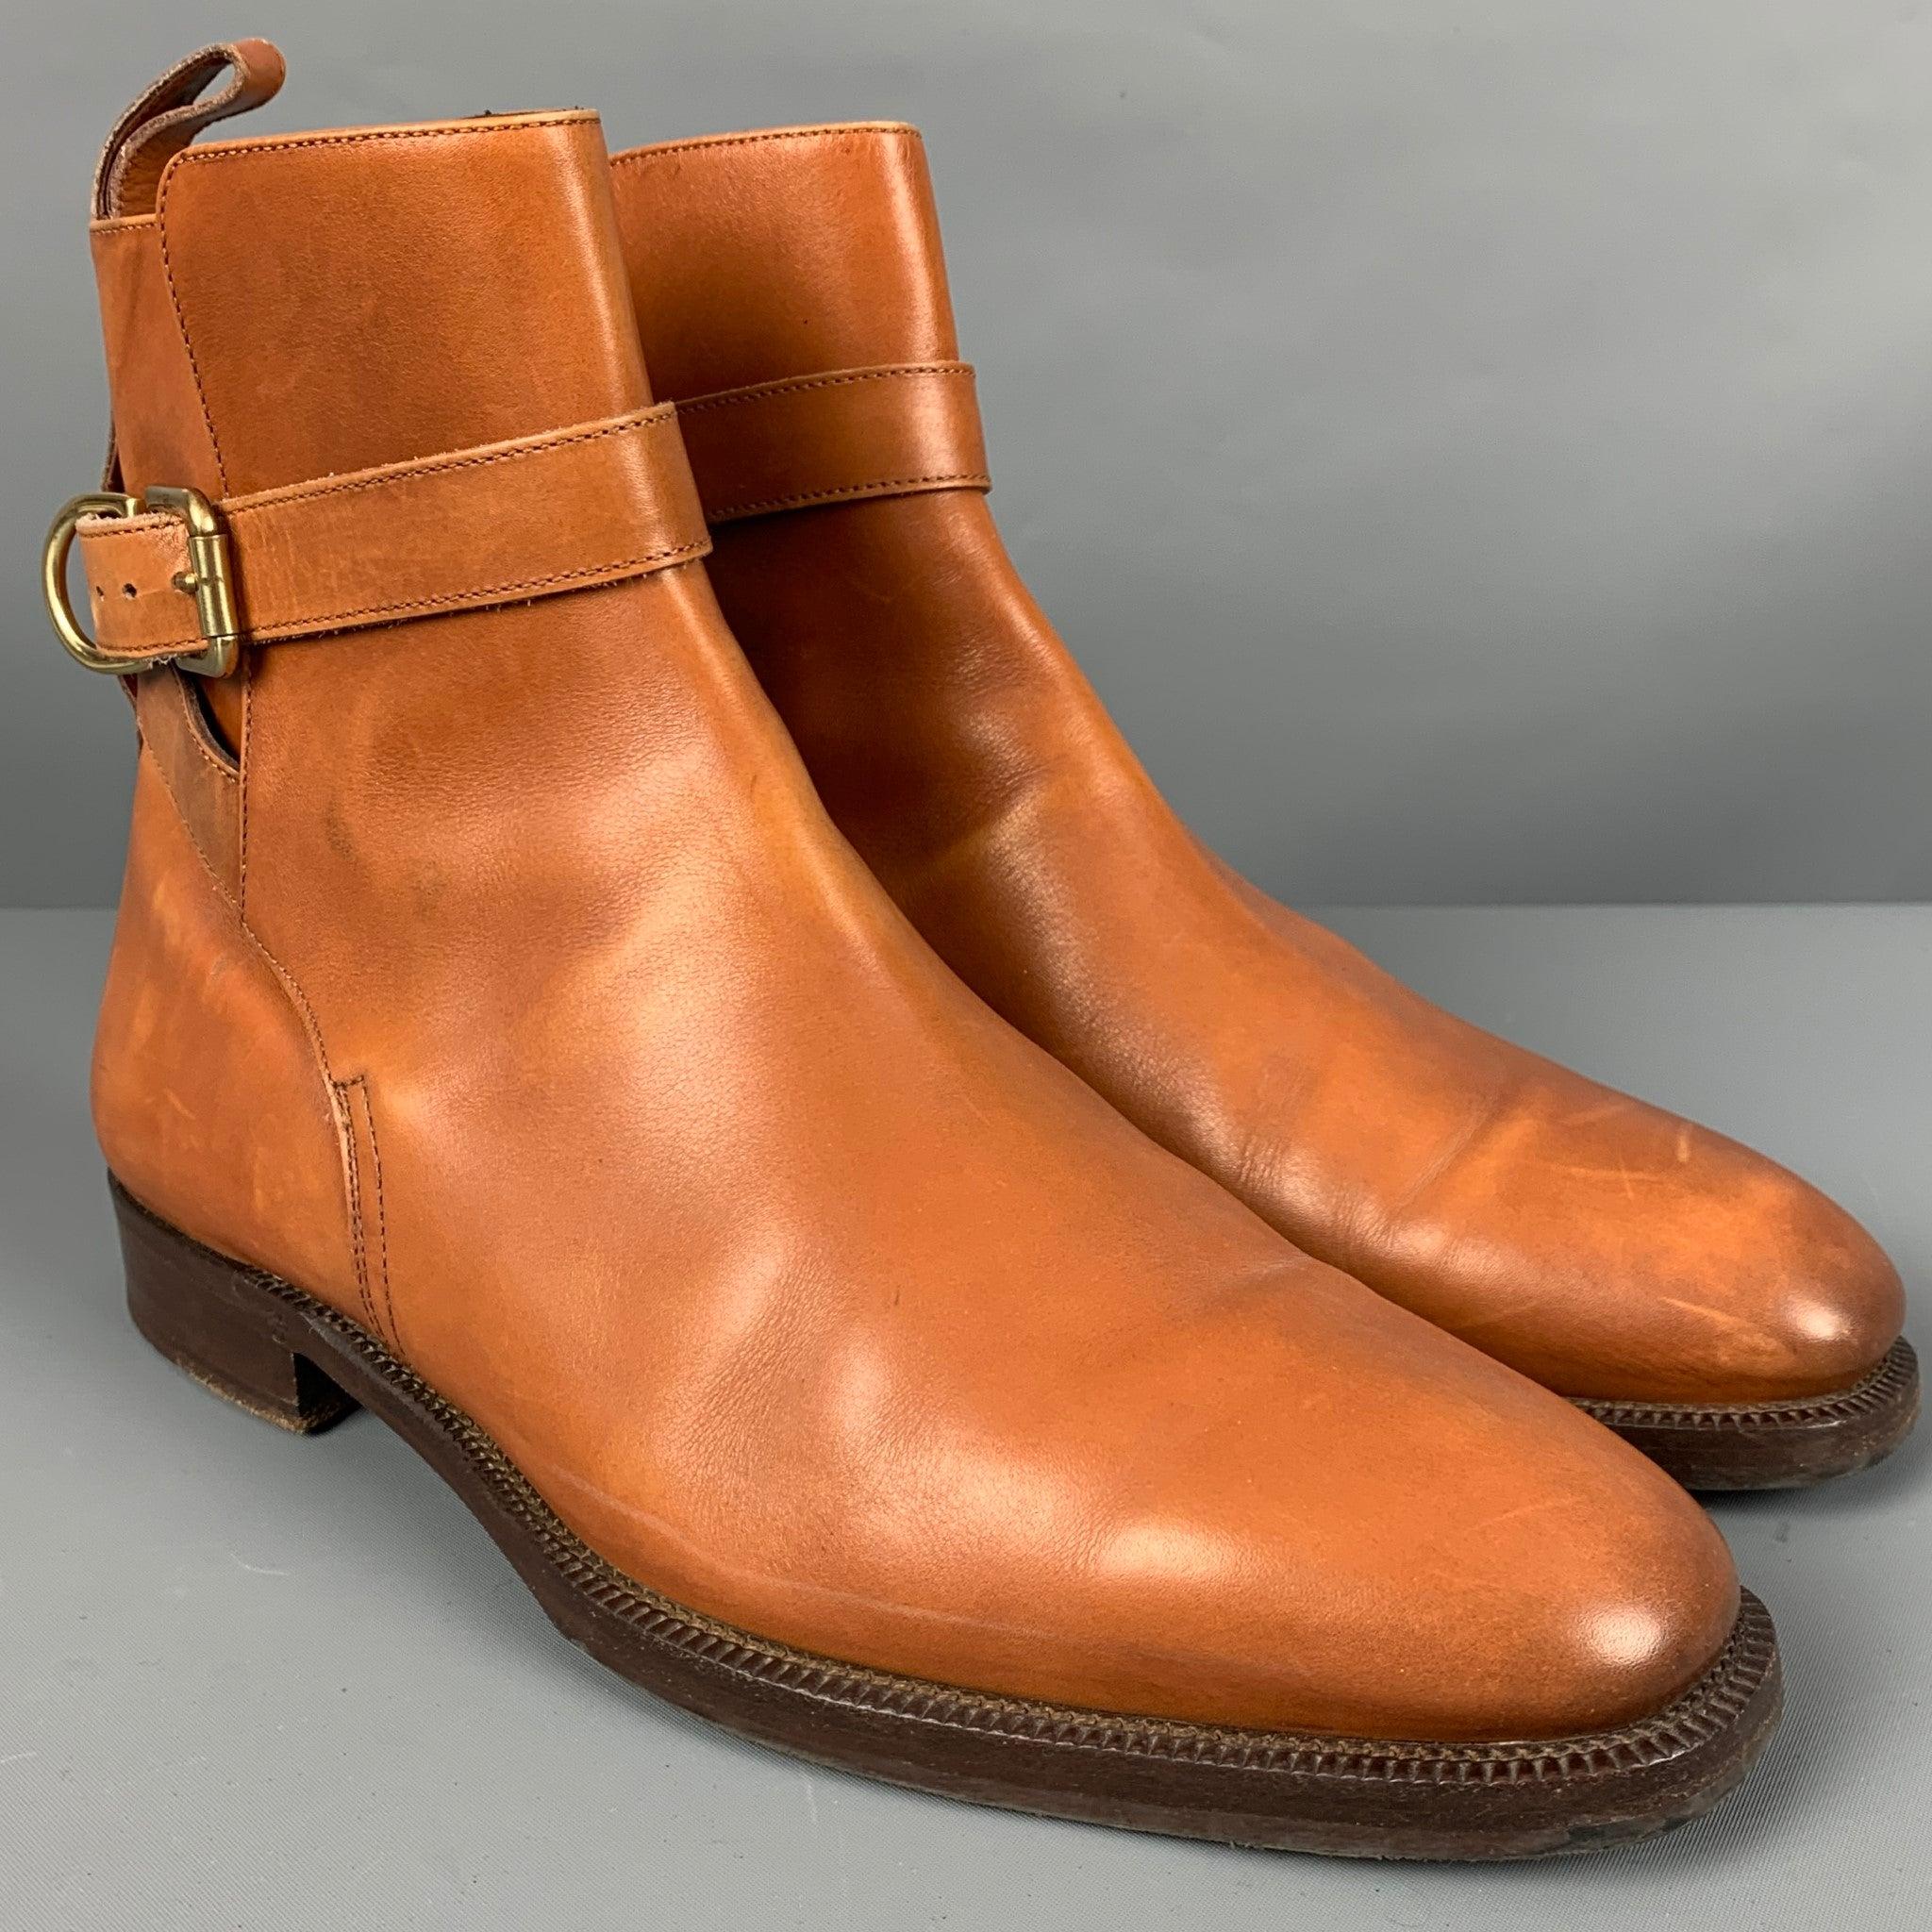 RALPH LAUREN boots in a camel leather featuring gold tone ankle strap. Made in Italy.Very Good Pre-Owned Condition. Minor signs of wear. 

Marked:   8 15083286236 9E 

Measurements: 
  Length: 11.25 inches Width: 4 inches Height: 8 inches 
  
  
